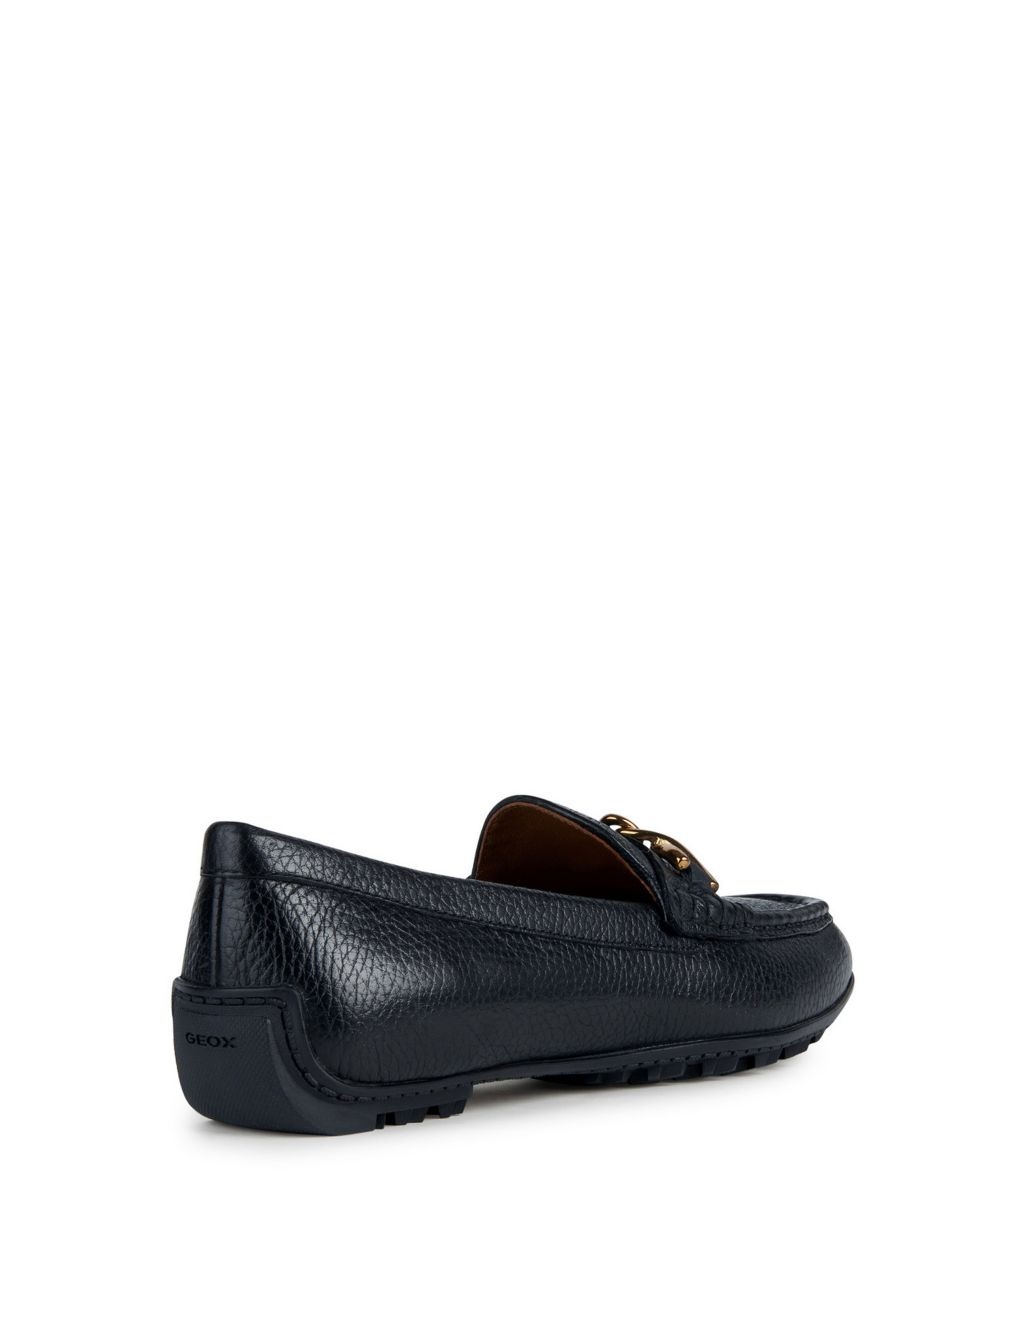 Leather Bar Slip On Flat Loafers 4 of 6